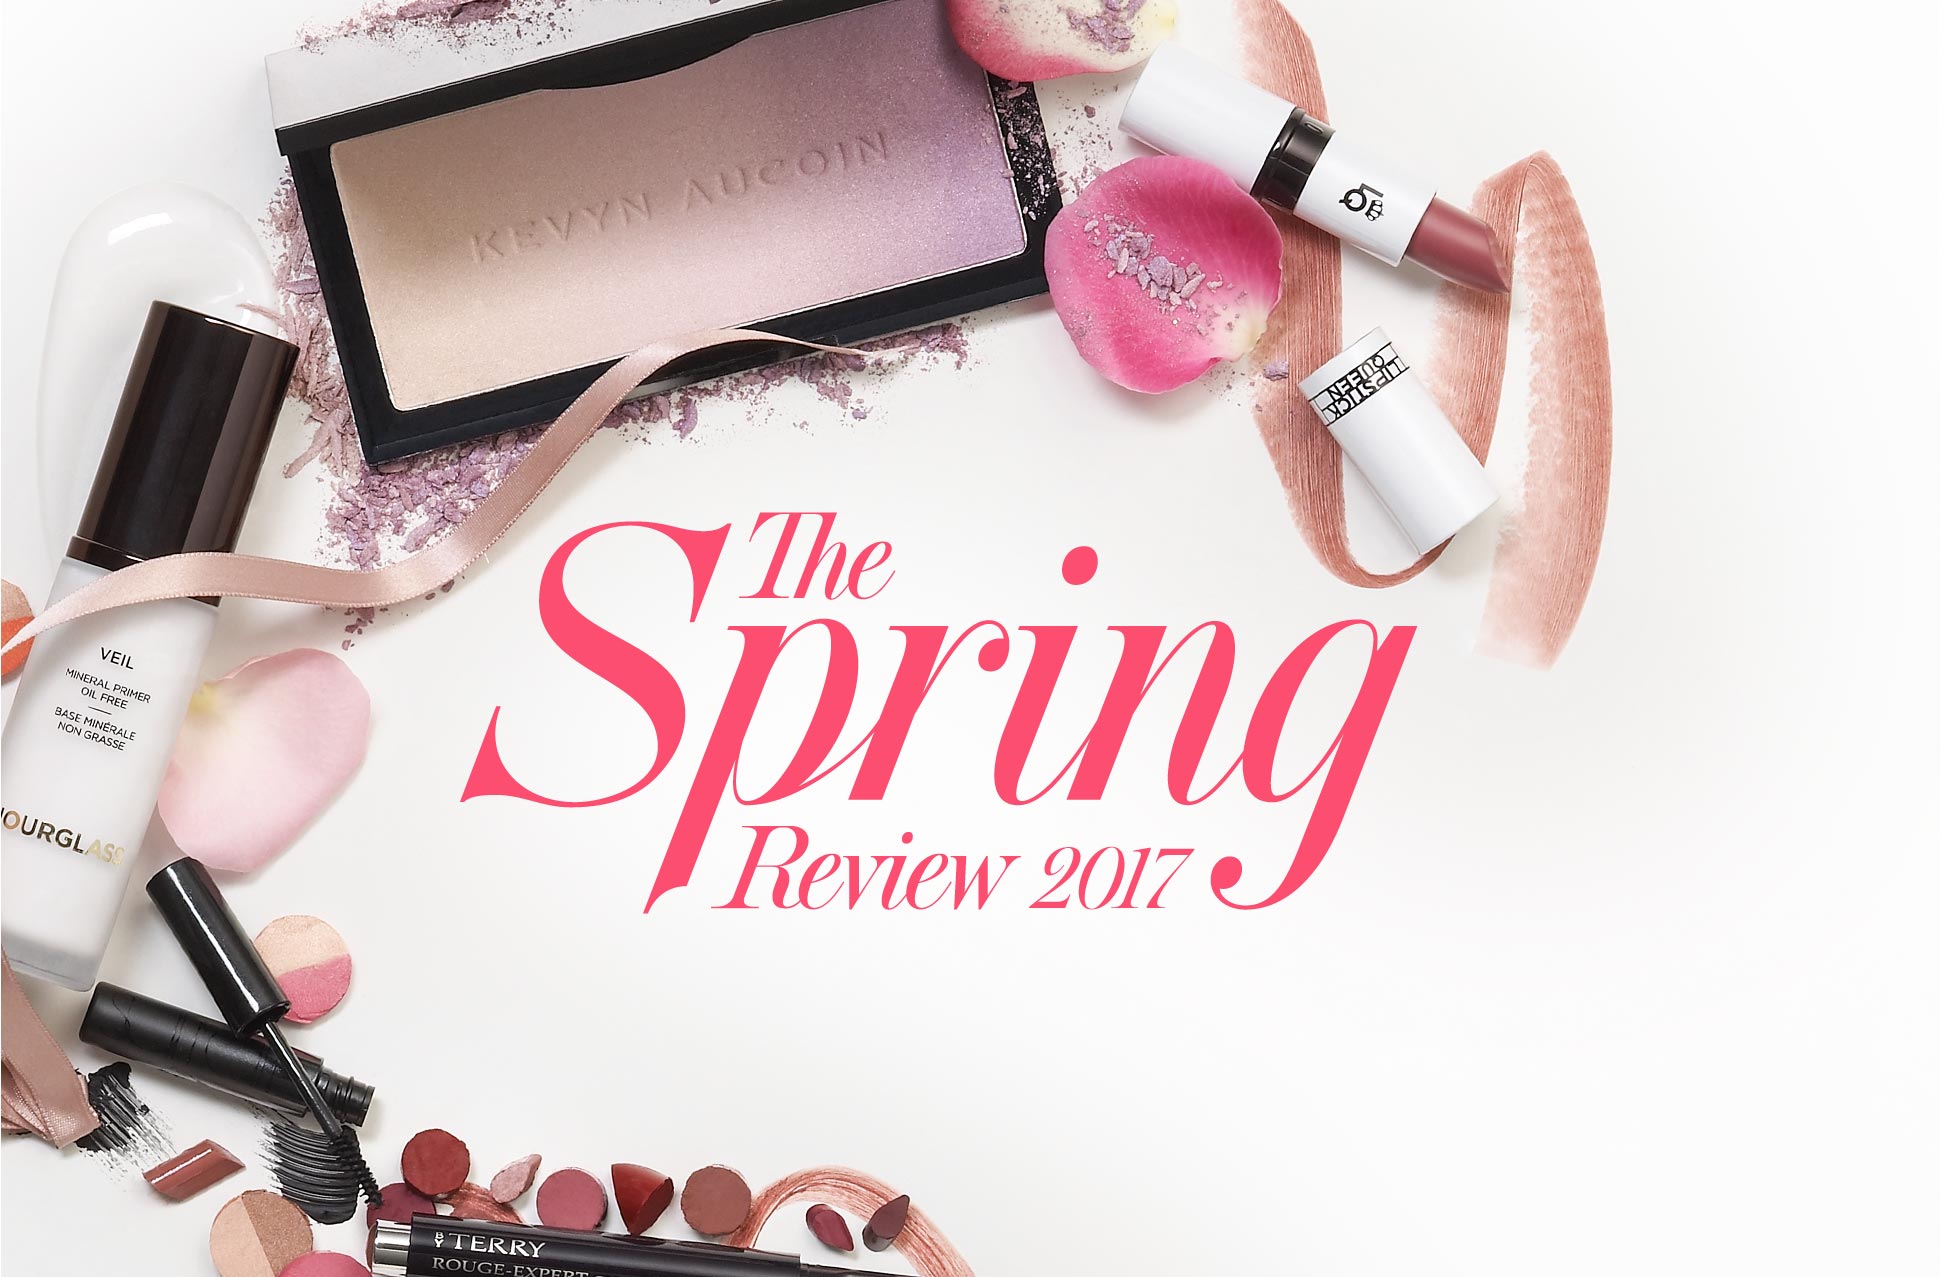 The Spring Review 2017